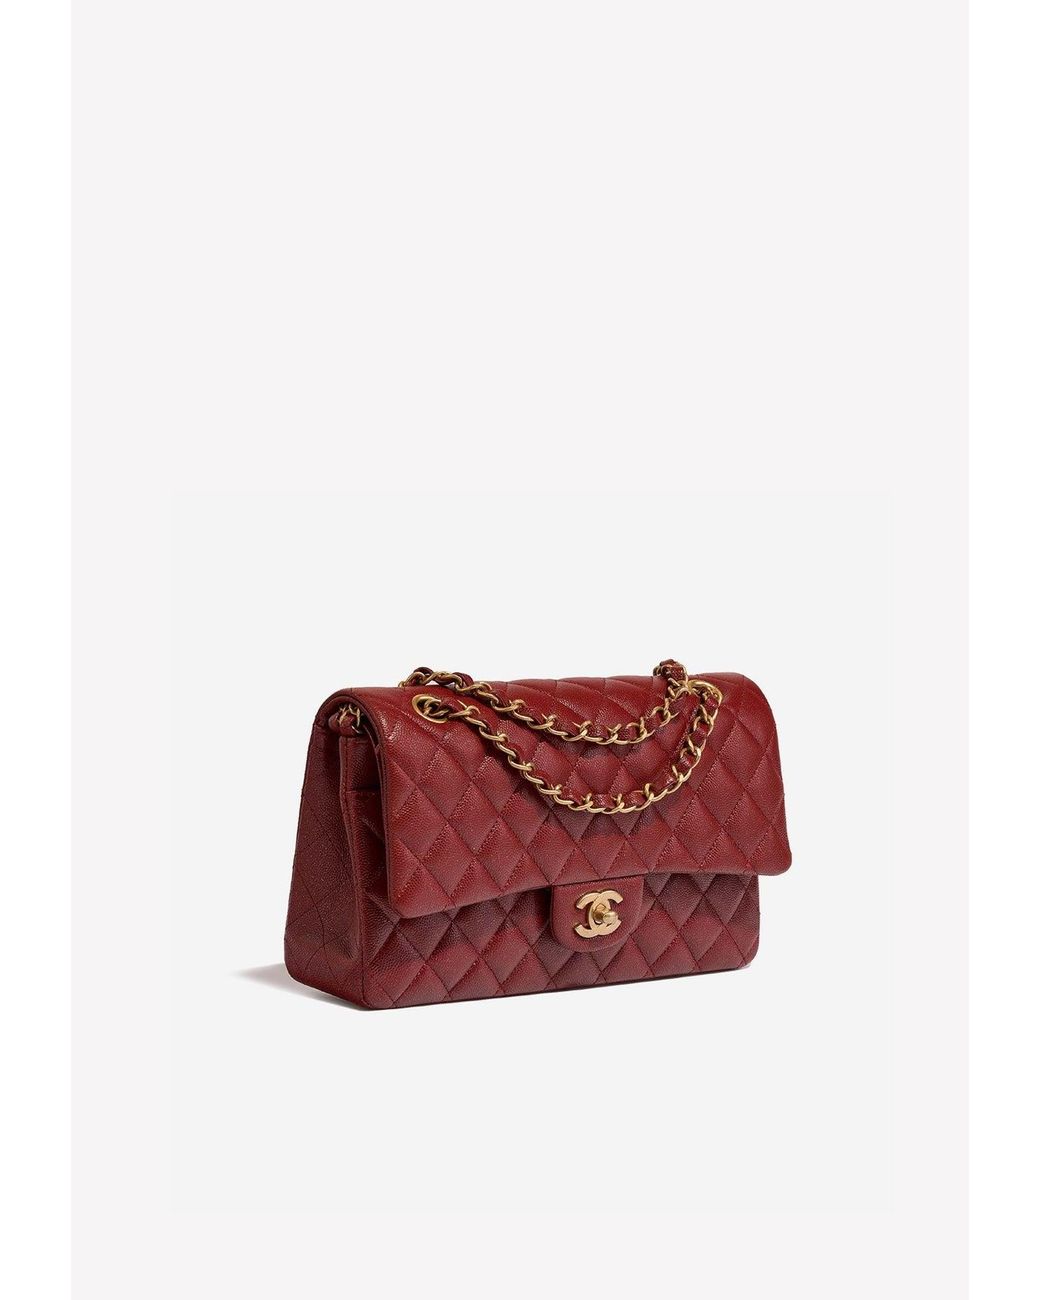 Chanel Medium Timeless Shoulder Bag In Red Caviar Leather With